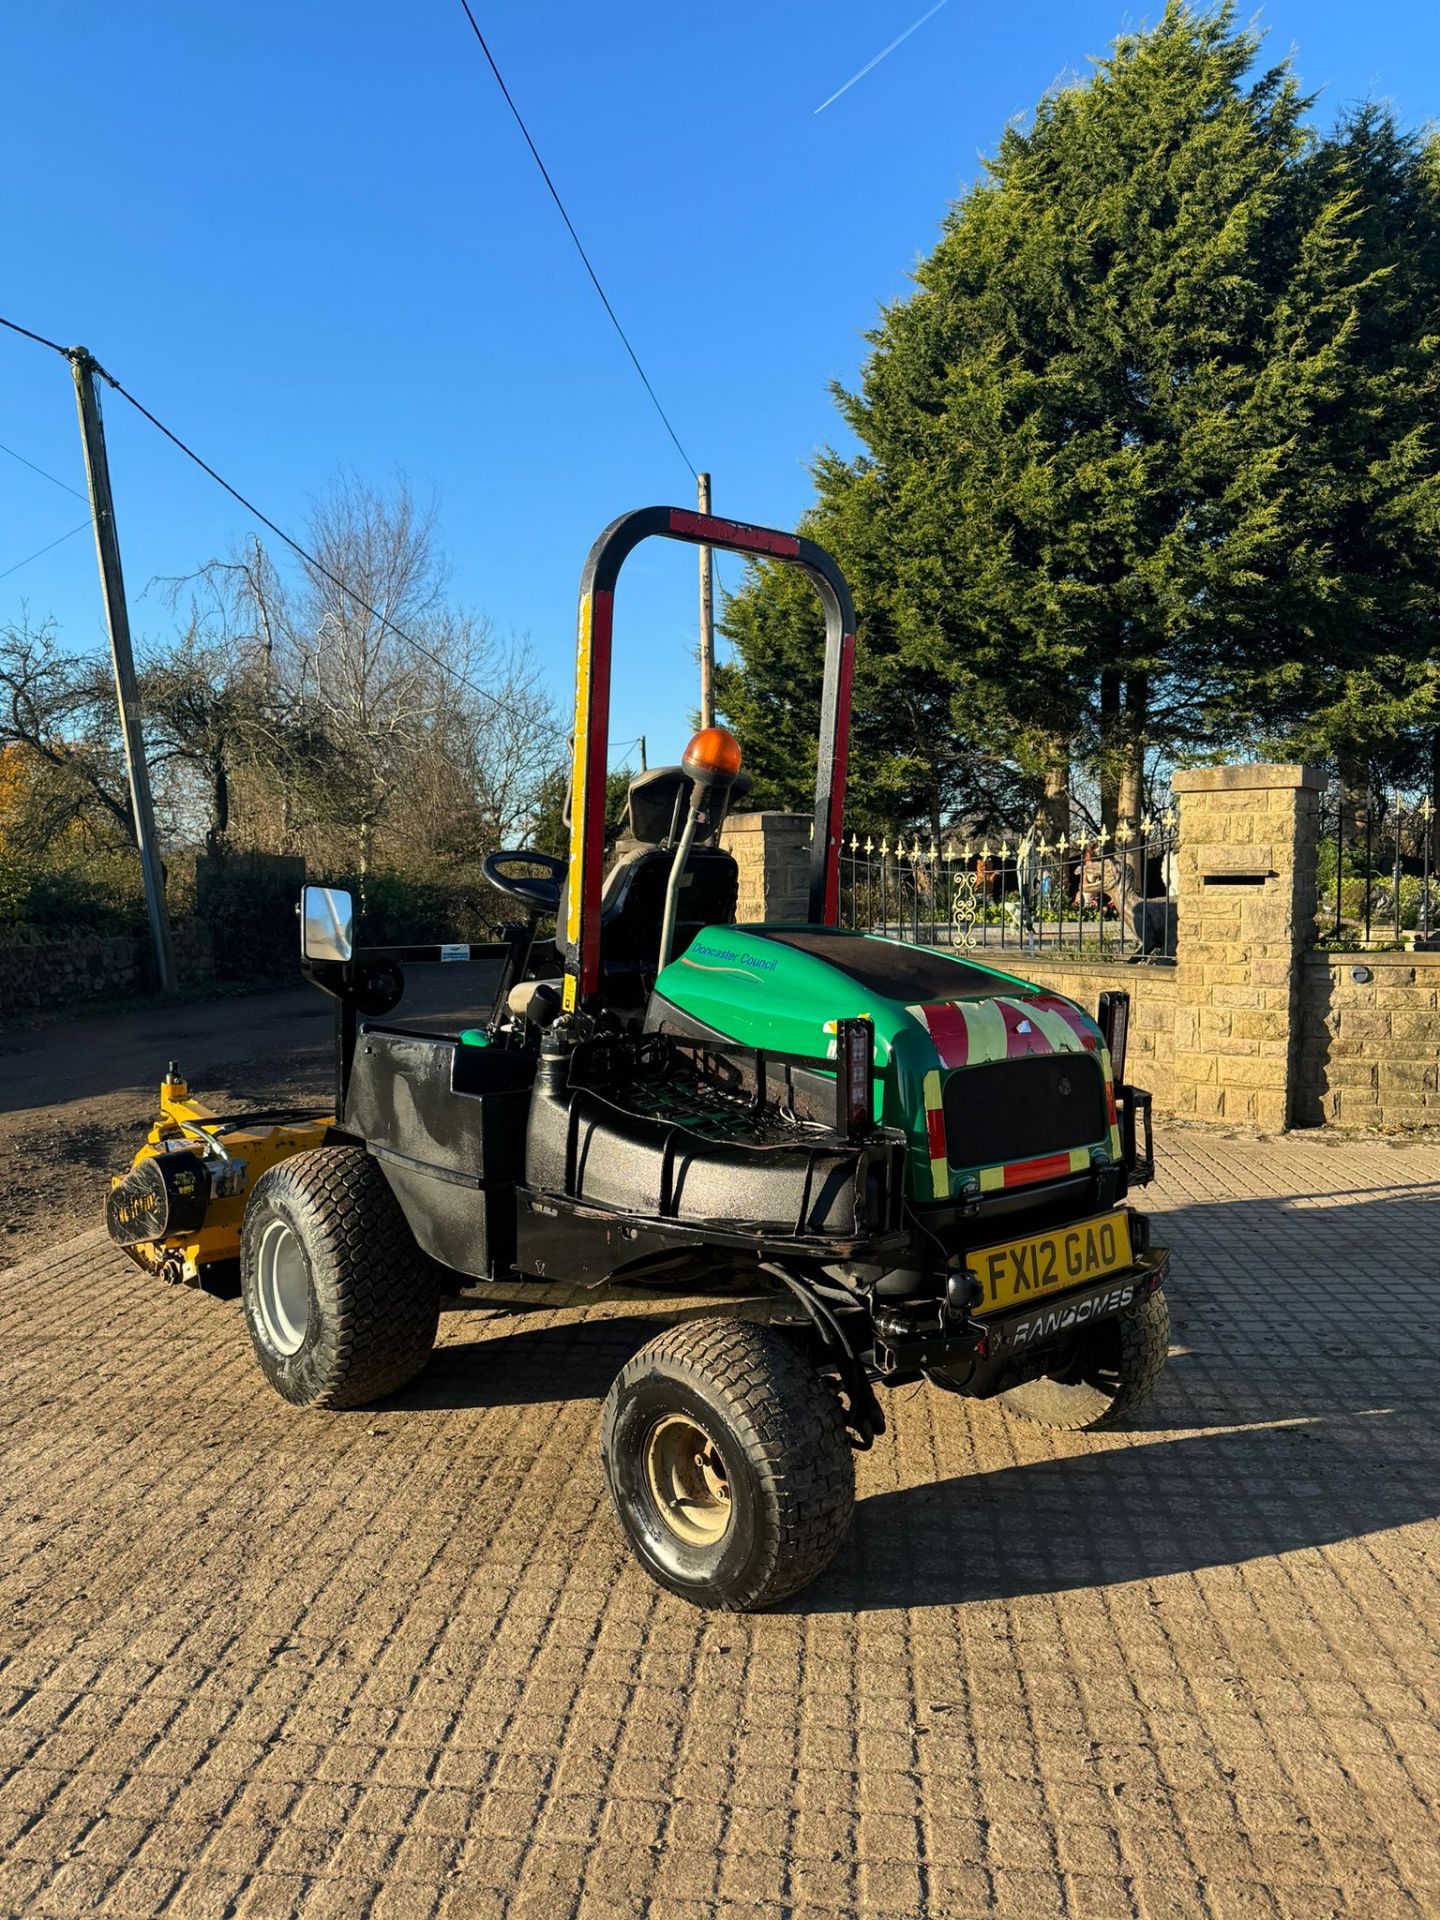 RANSOMES HR300 RIDE ON LAWN MOWER FLAIL MOWER *PLUS VAT* - Image 13 of 20